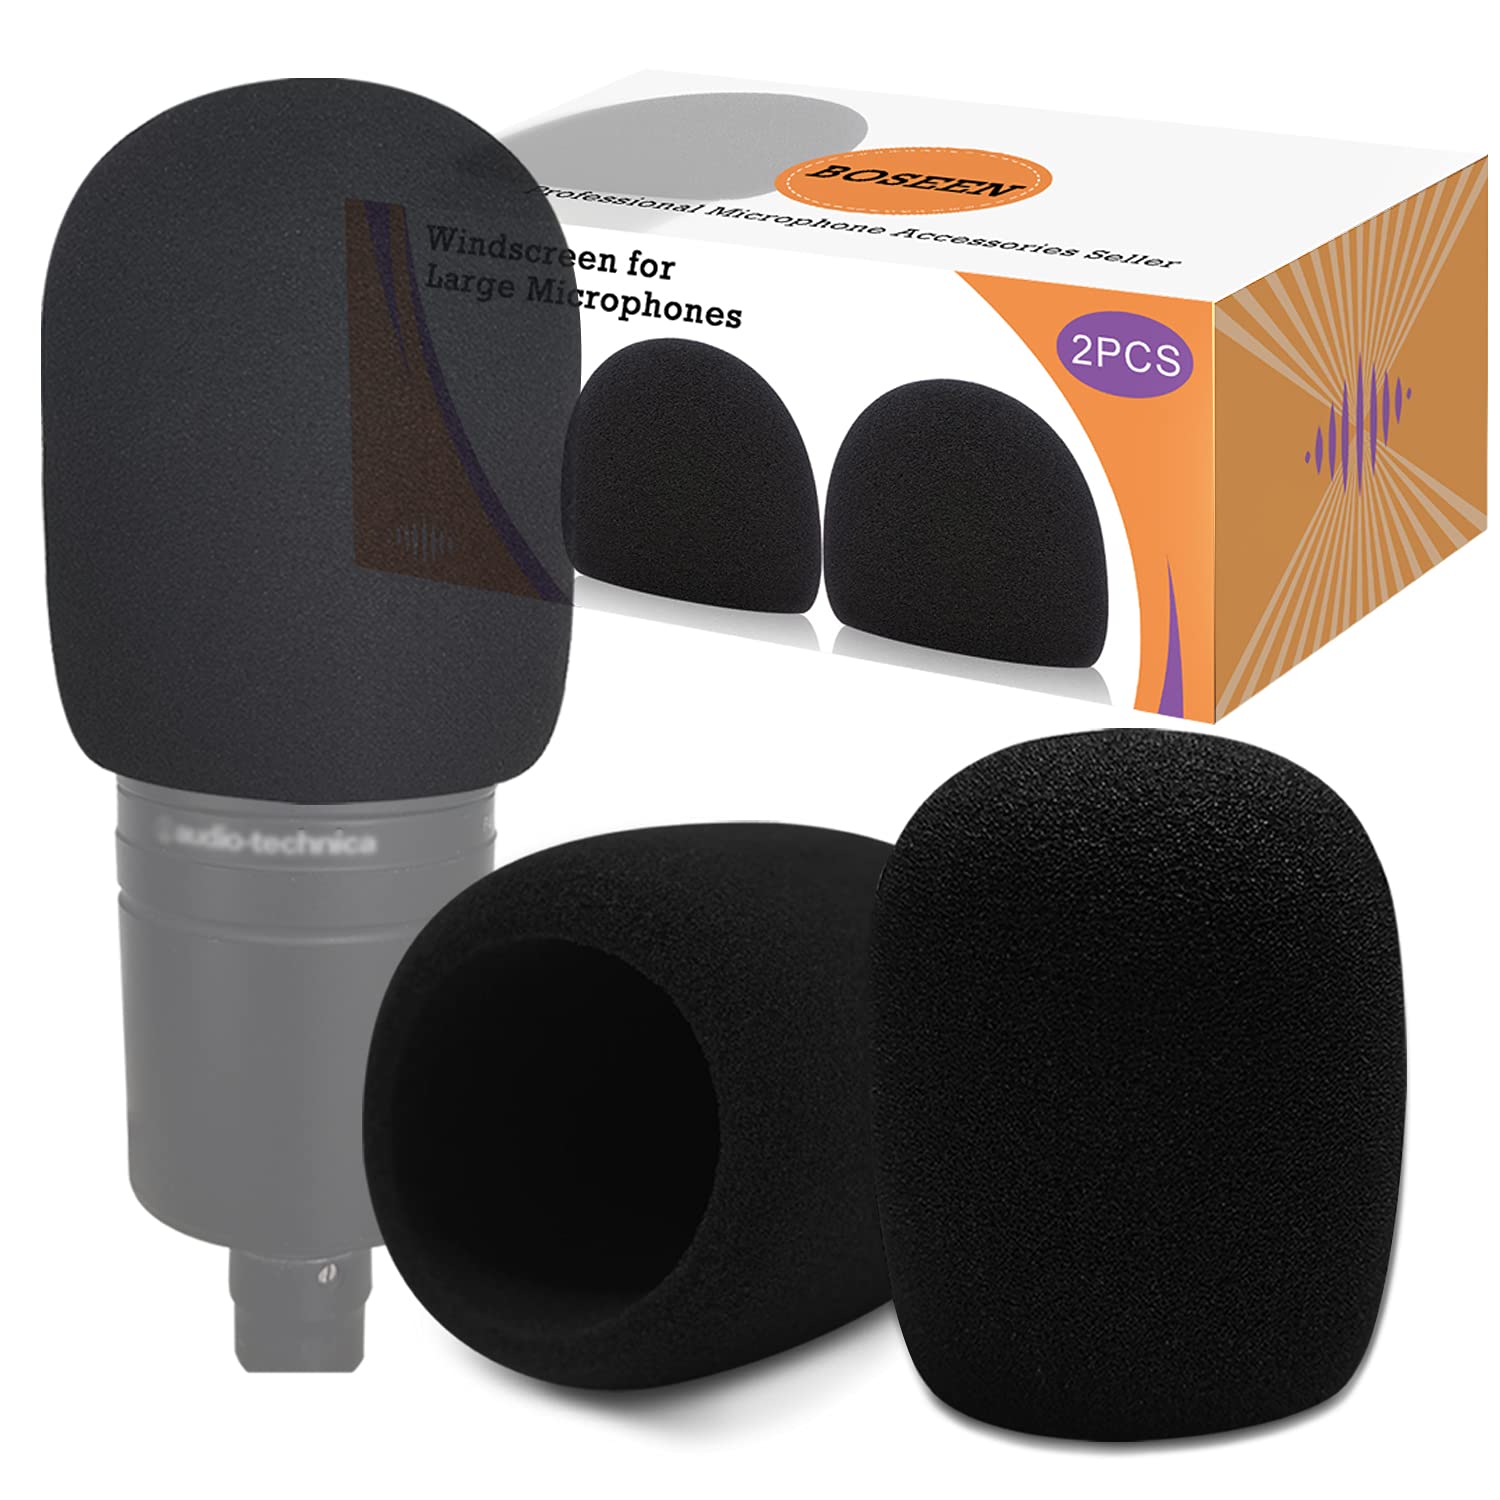 Boseen Mic Cover Foam Microphone Windscreen 2Pcs Pop Filter For At2020, At2020Usb, At2020Usbi, At2035, At2050 Recording Condenser Micro